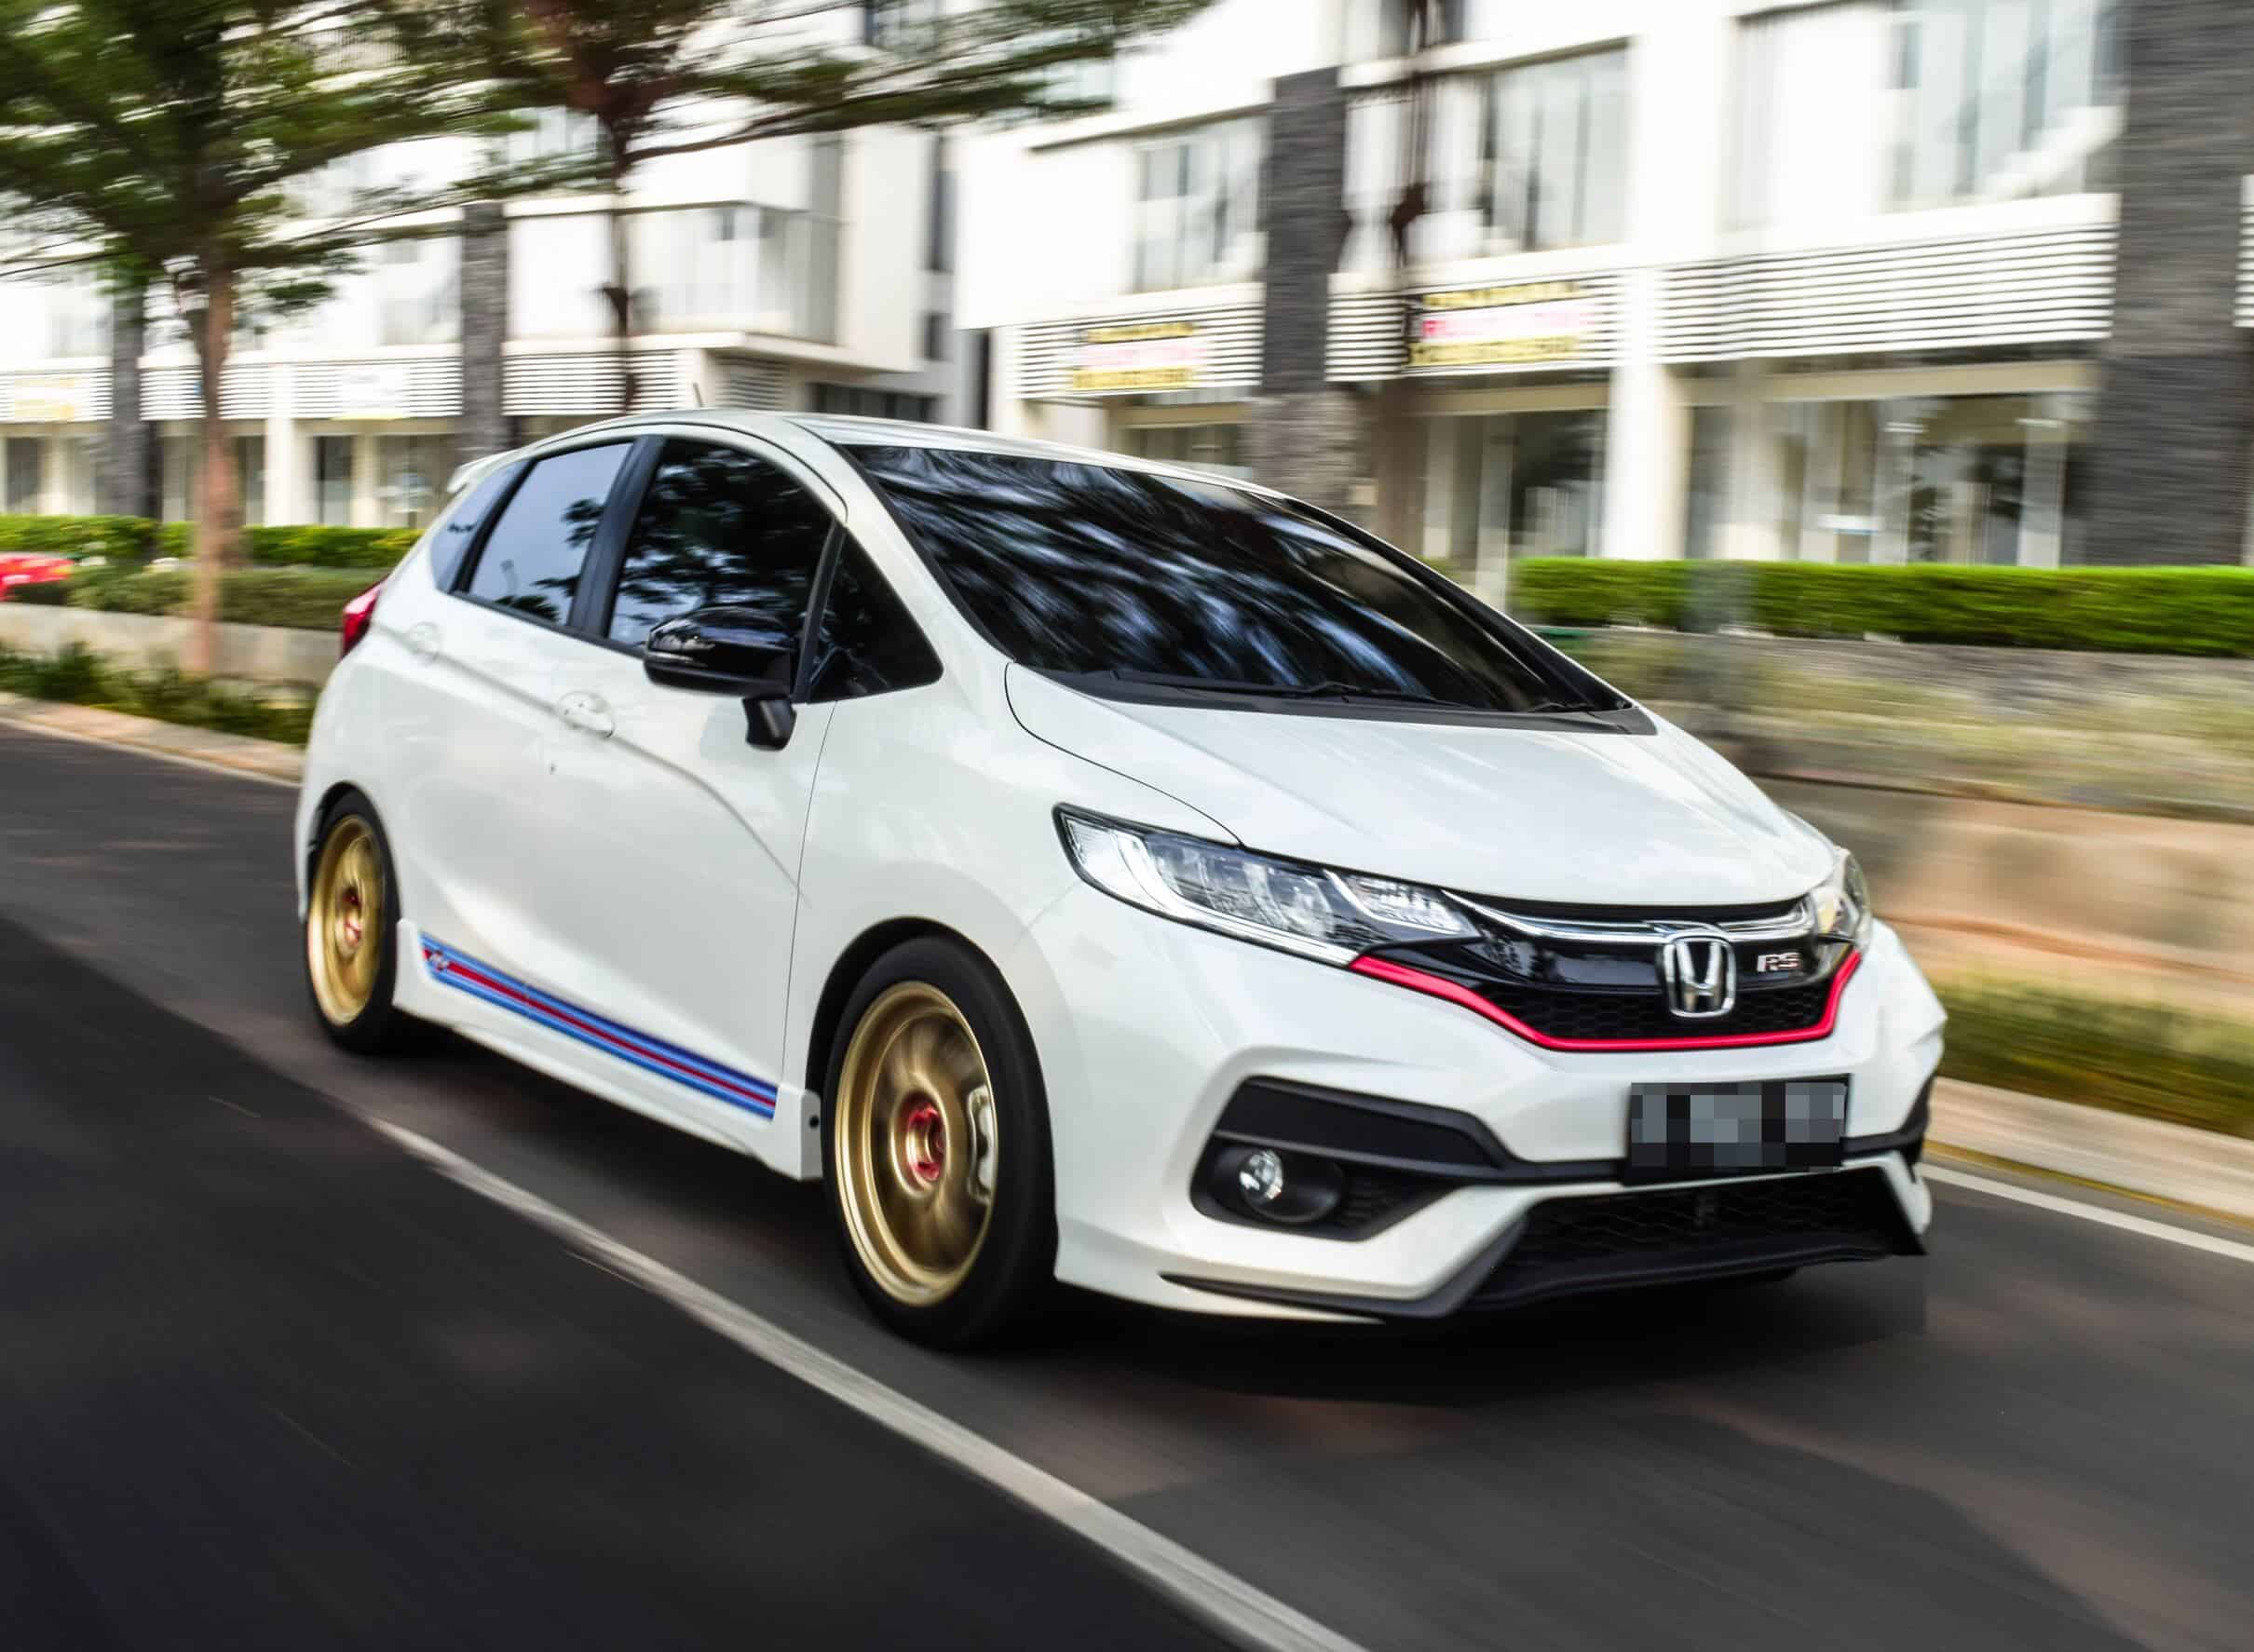 White Honda Jazz - A Stylish and Practical Compact Car.

